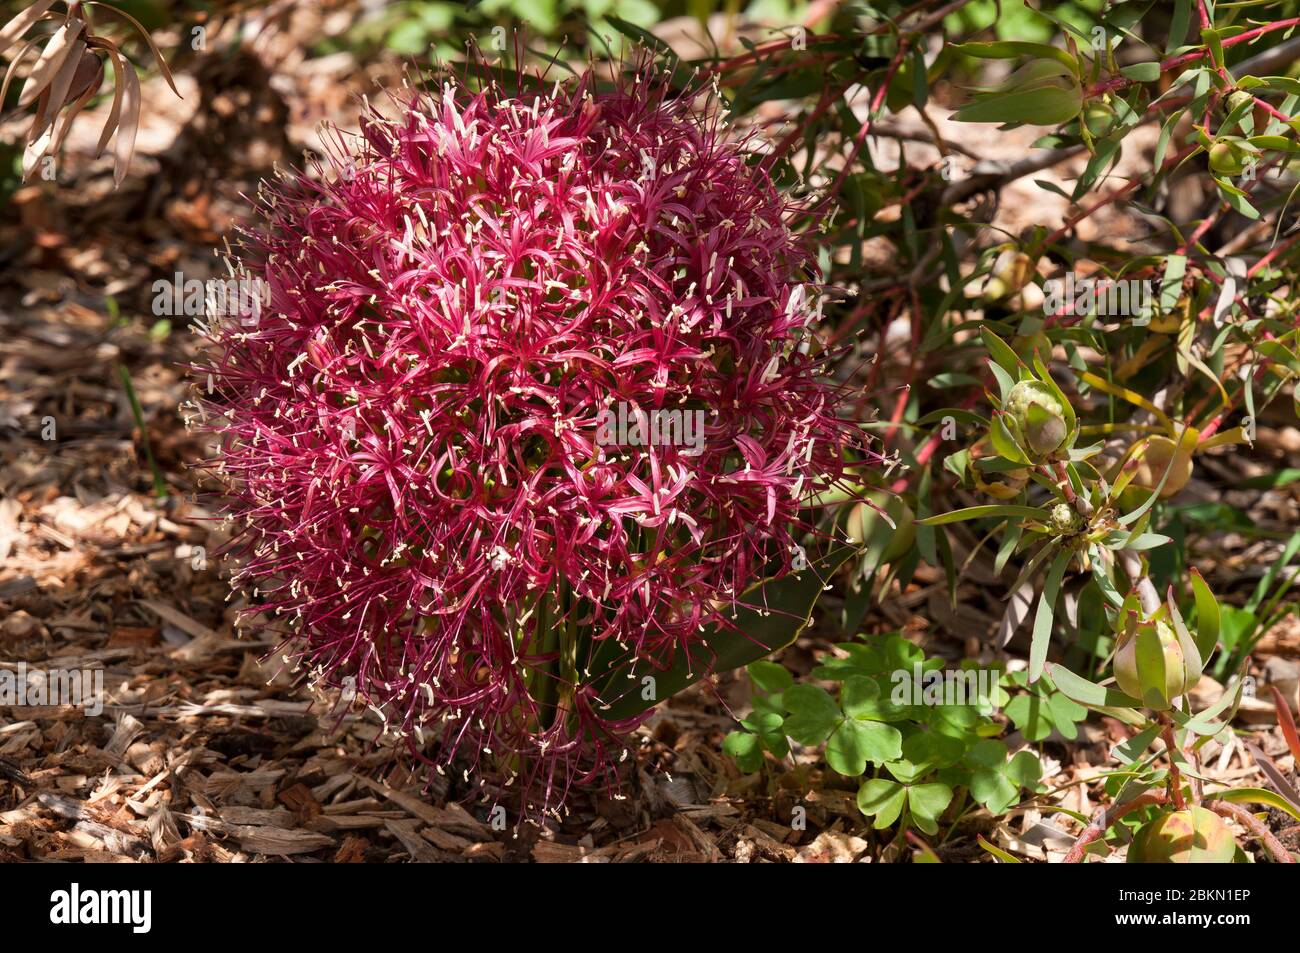 Sydney Australia, head of pink flowers of a Boophone disticha or tumbleweed a native of Africa Stock Photo